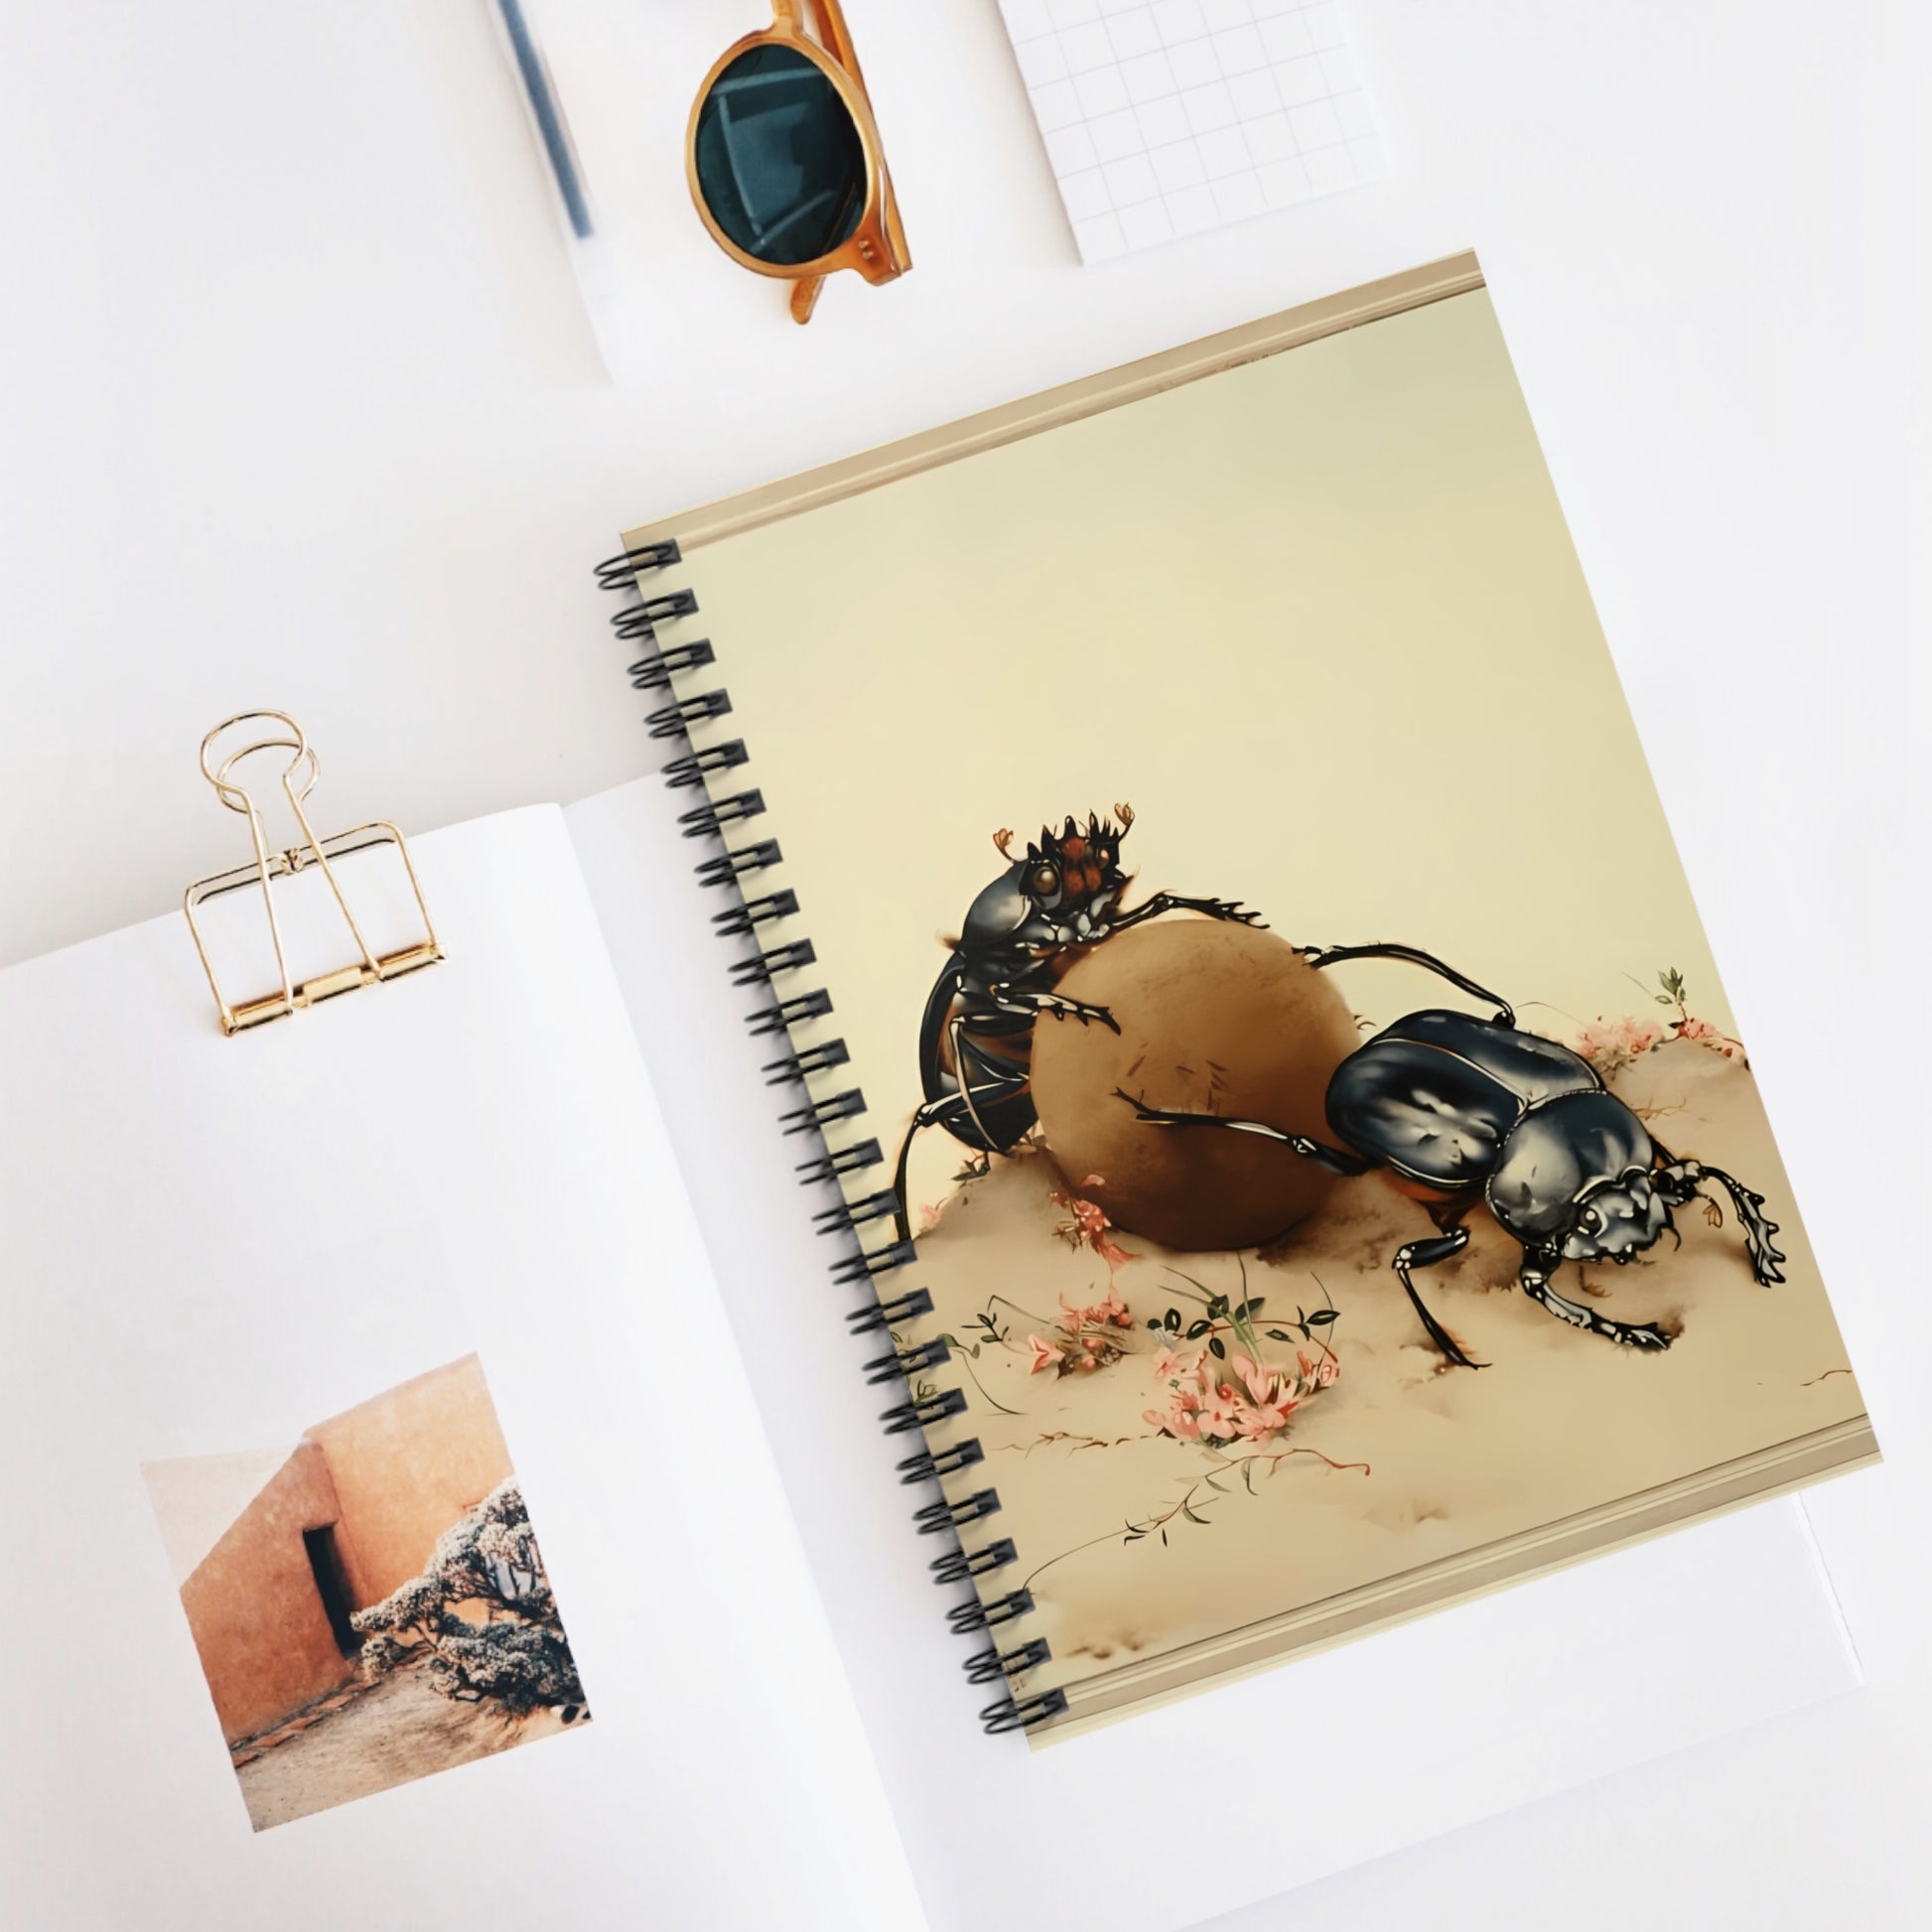 Spiral notebook with vintage illustration of two scarab dung beetles rolling a ball of poop, created by Jean-Henri Fabre.